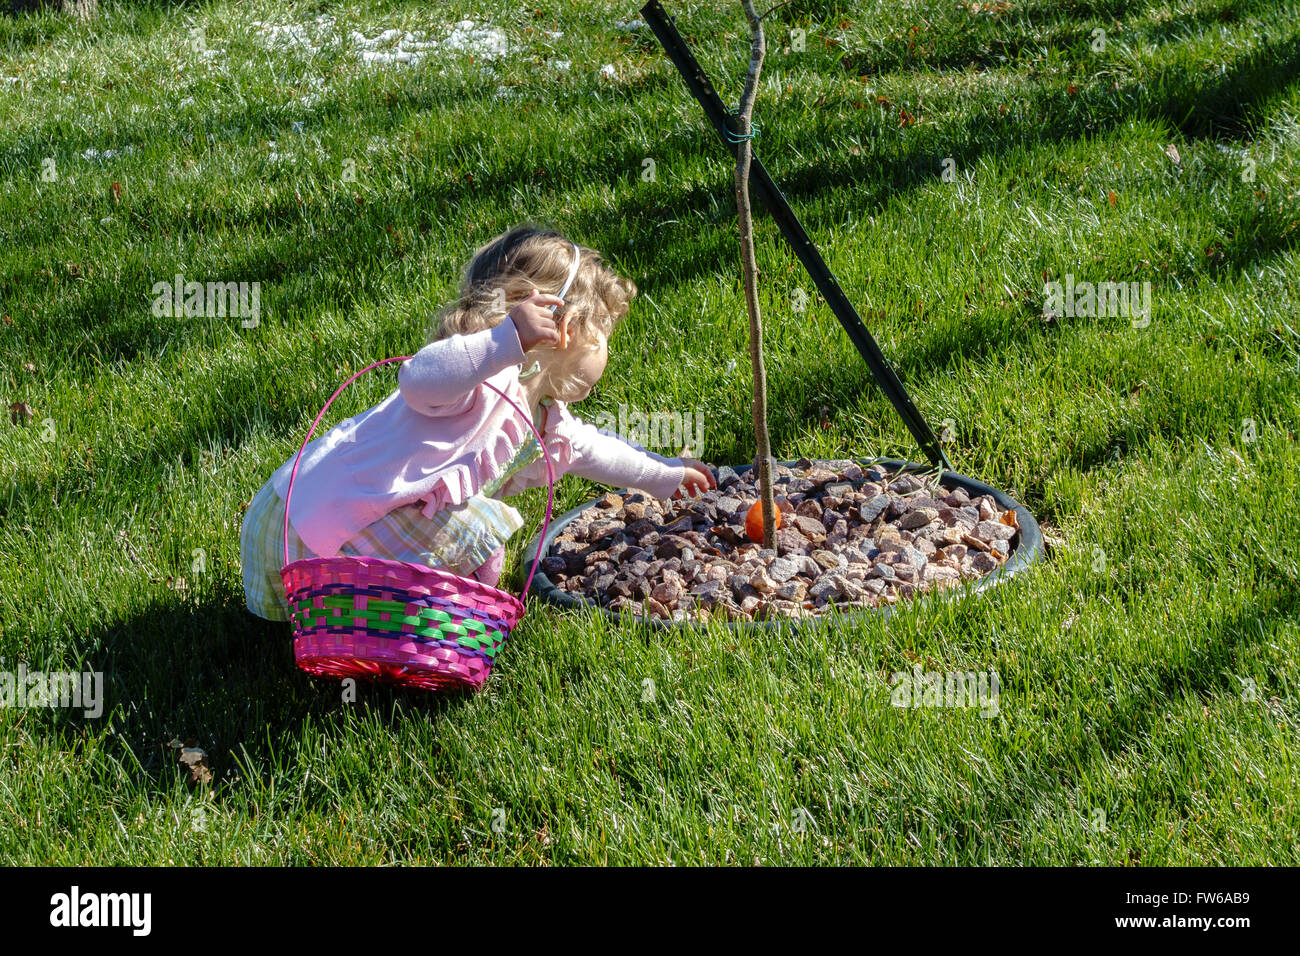 A two year old Caucasian toddler girl reaches for an egg during an Easter egg hunt outdoors. Stock Photo